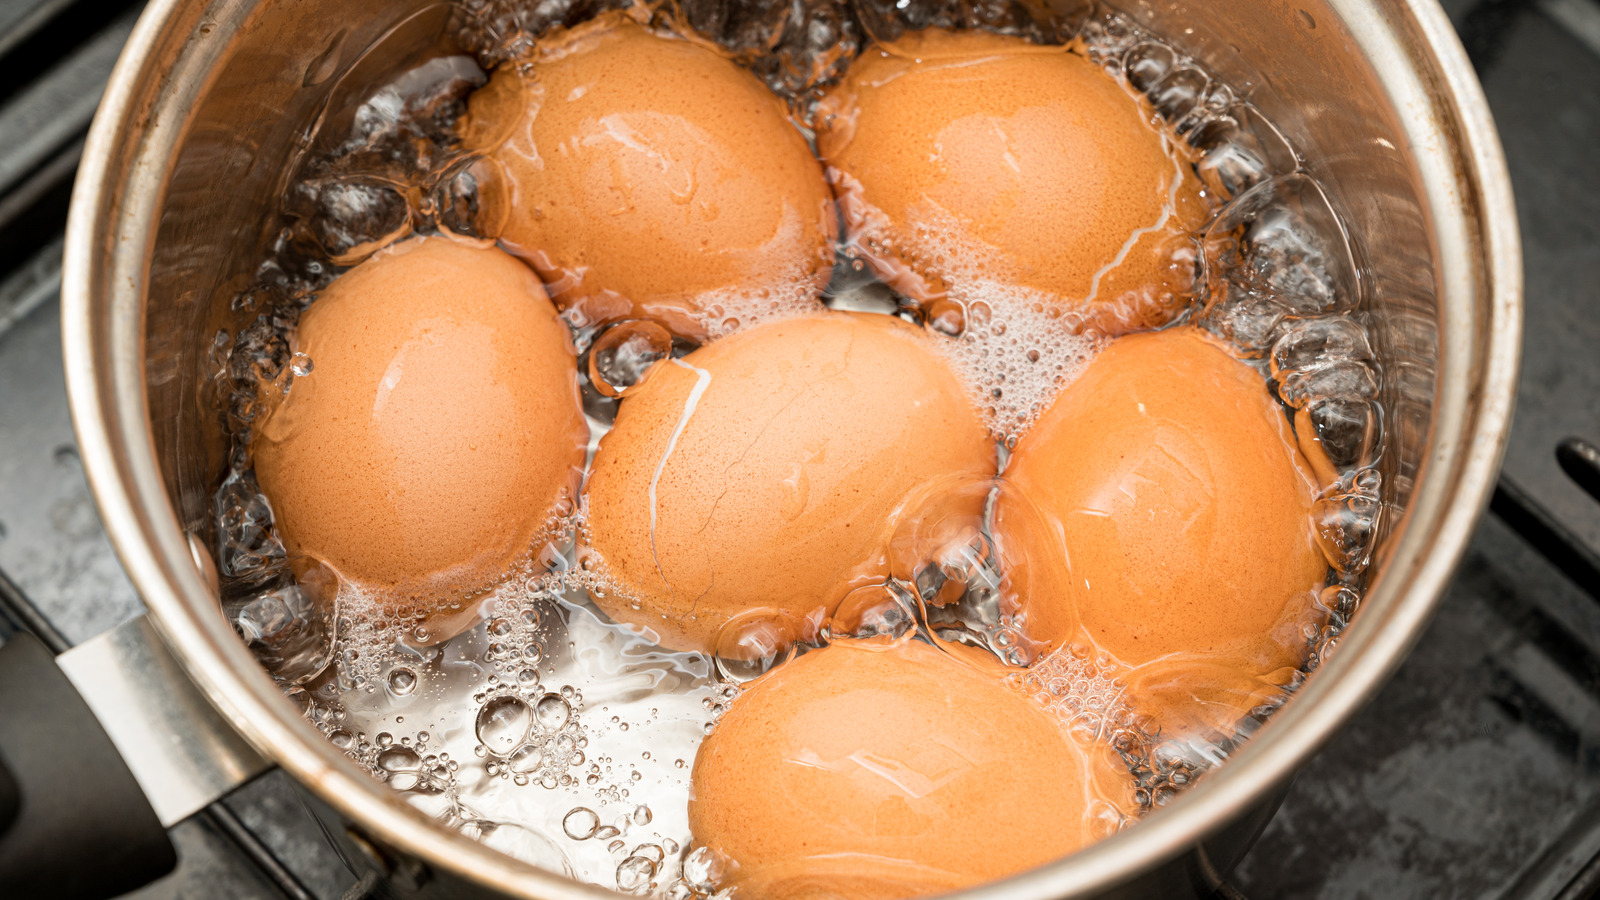 Avoid the messy hard-boiled egg experience with just one kitchen tool